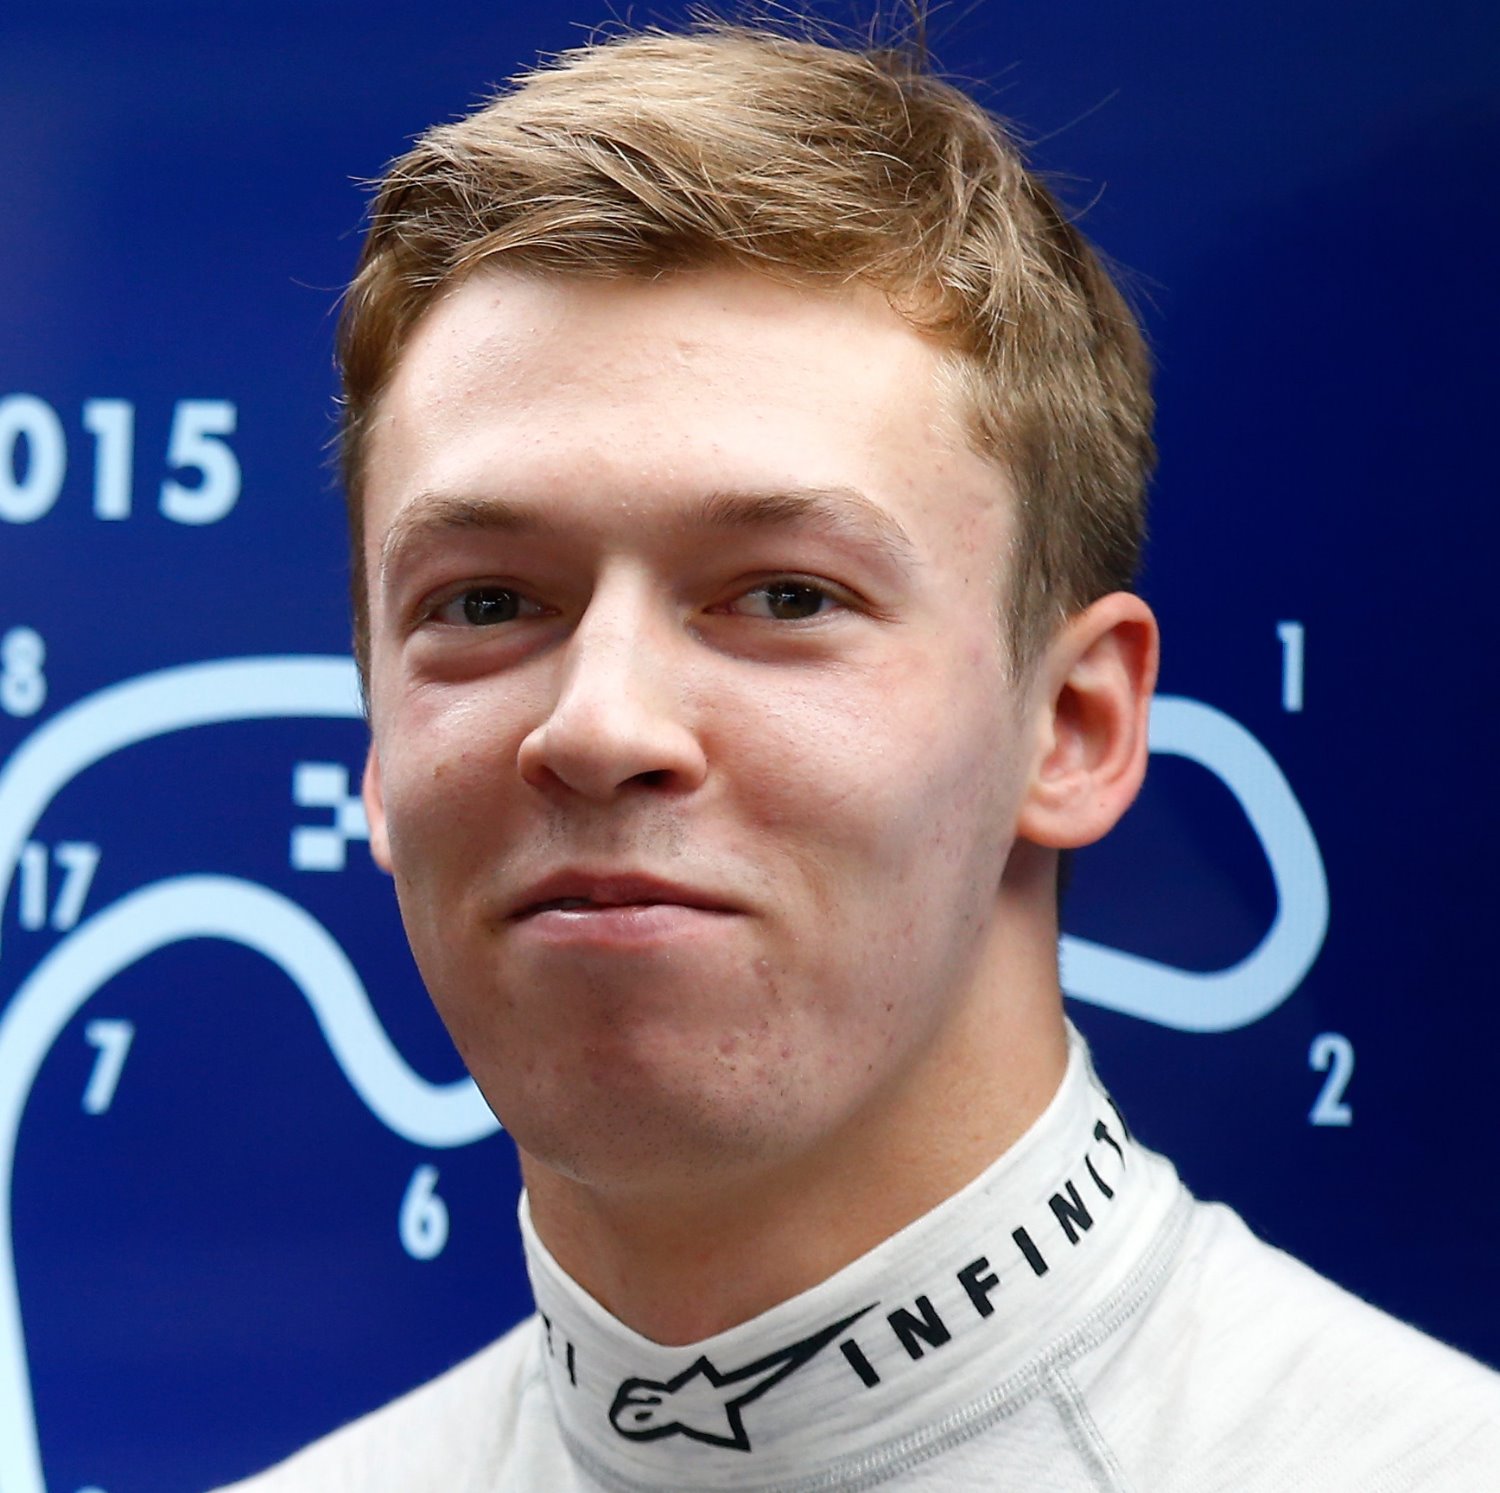 Kvyat happy to race in home country